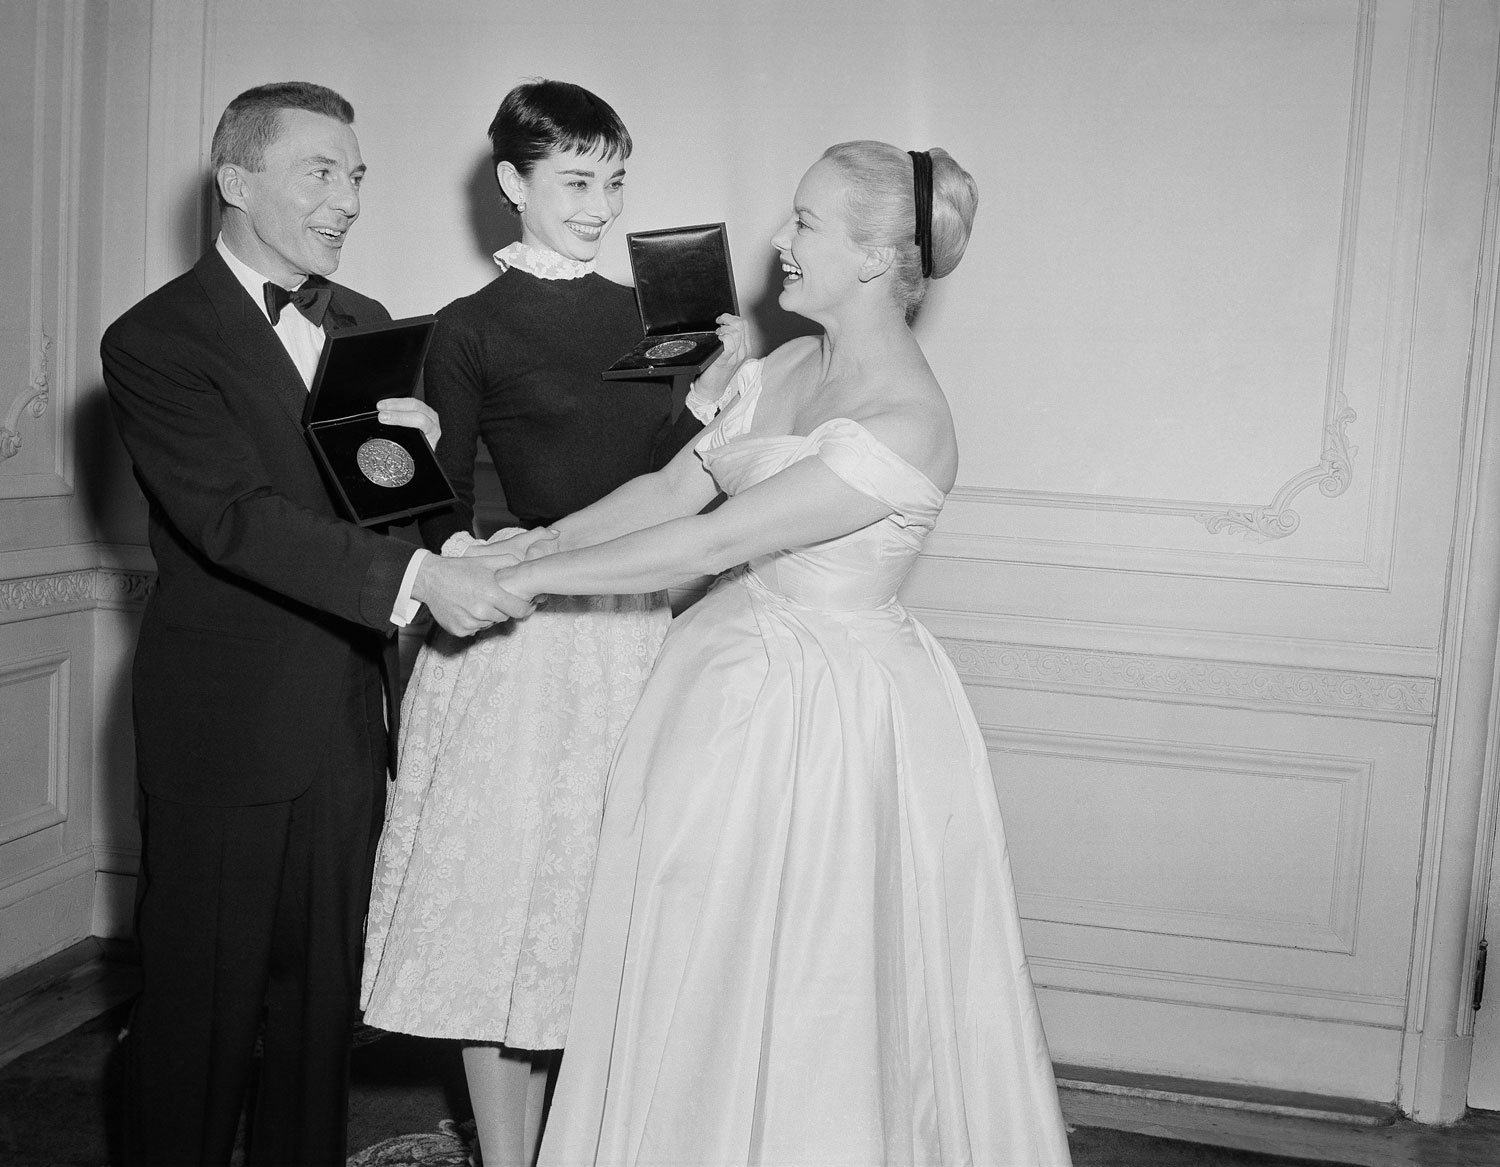  Actor David Wayne and Academy Award winning actress Audrey Hepburn, center, are congratulated by television star Faye Emerson after receiving the American Theater Wing’s Eighth Annual Tony Awards at the Hotel Plaza in New York City on March 28, 1954